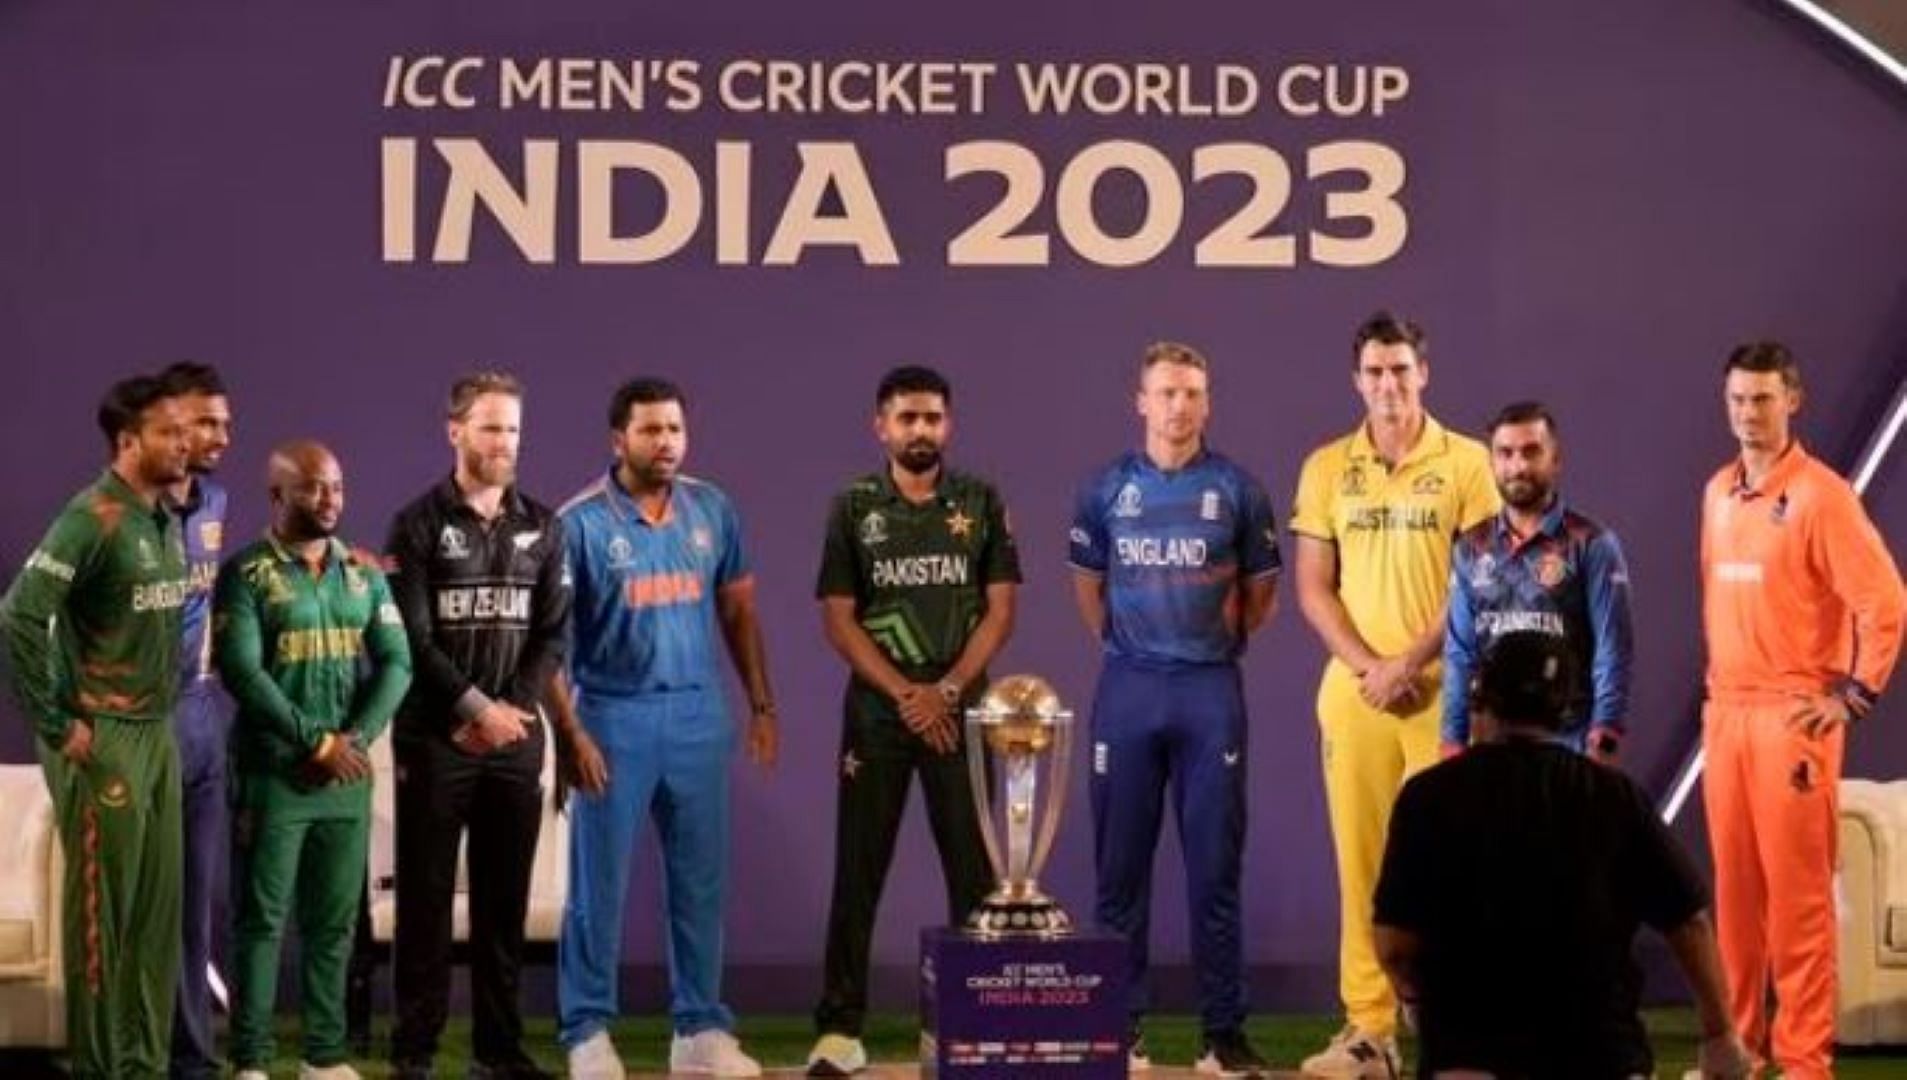 The ODI World Cup in India will be the 13th edition of the tournament